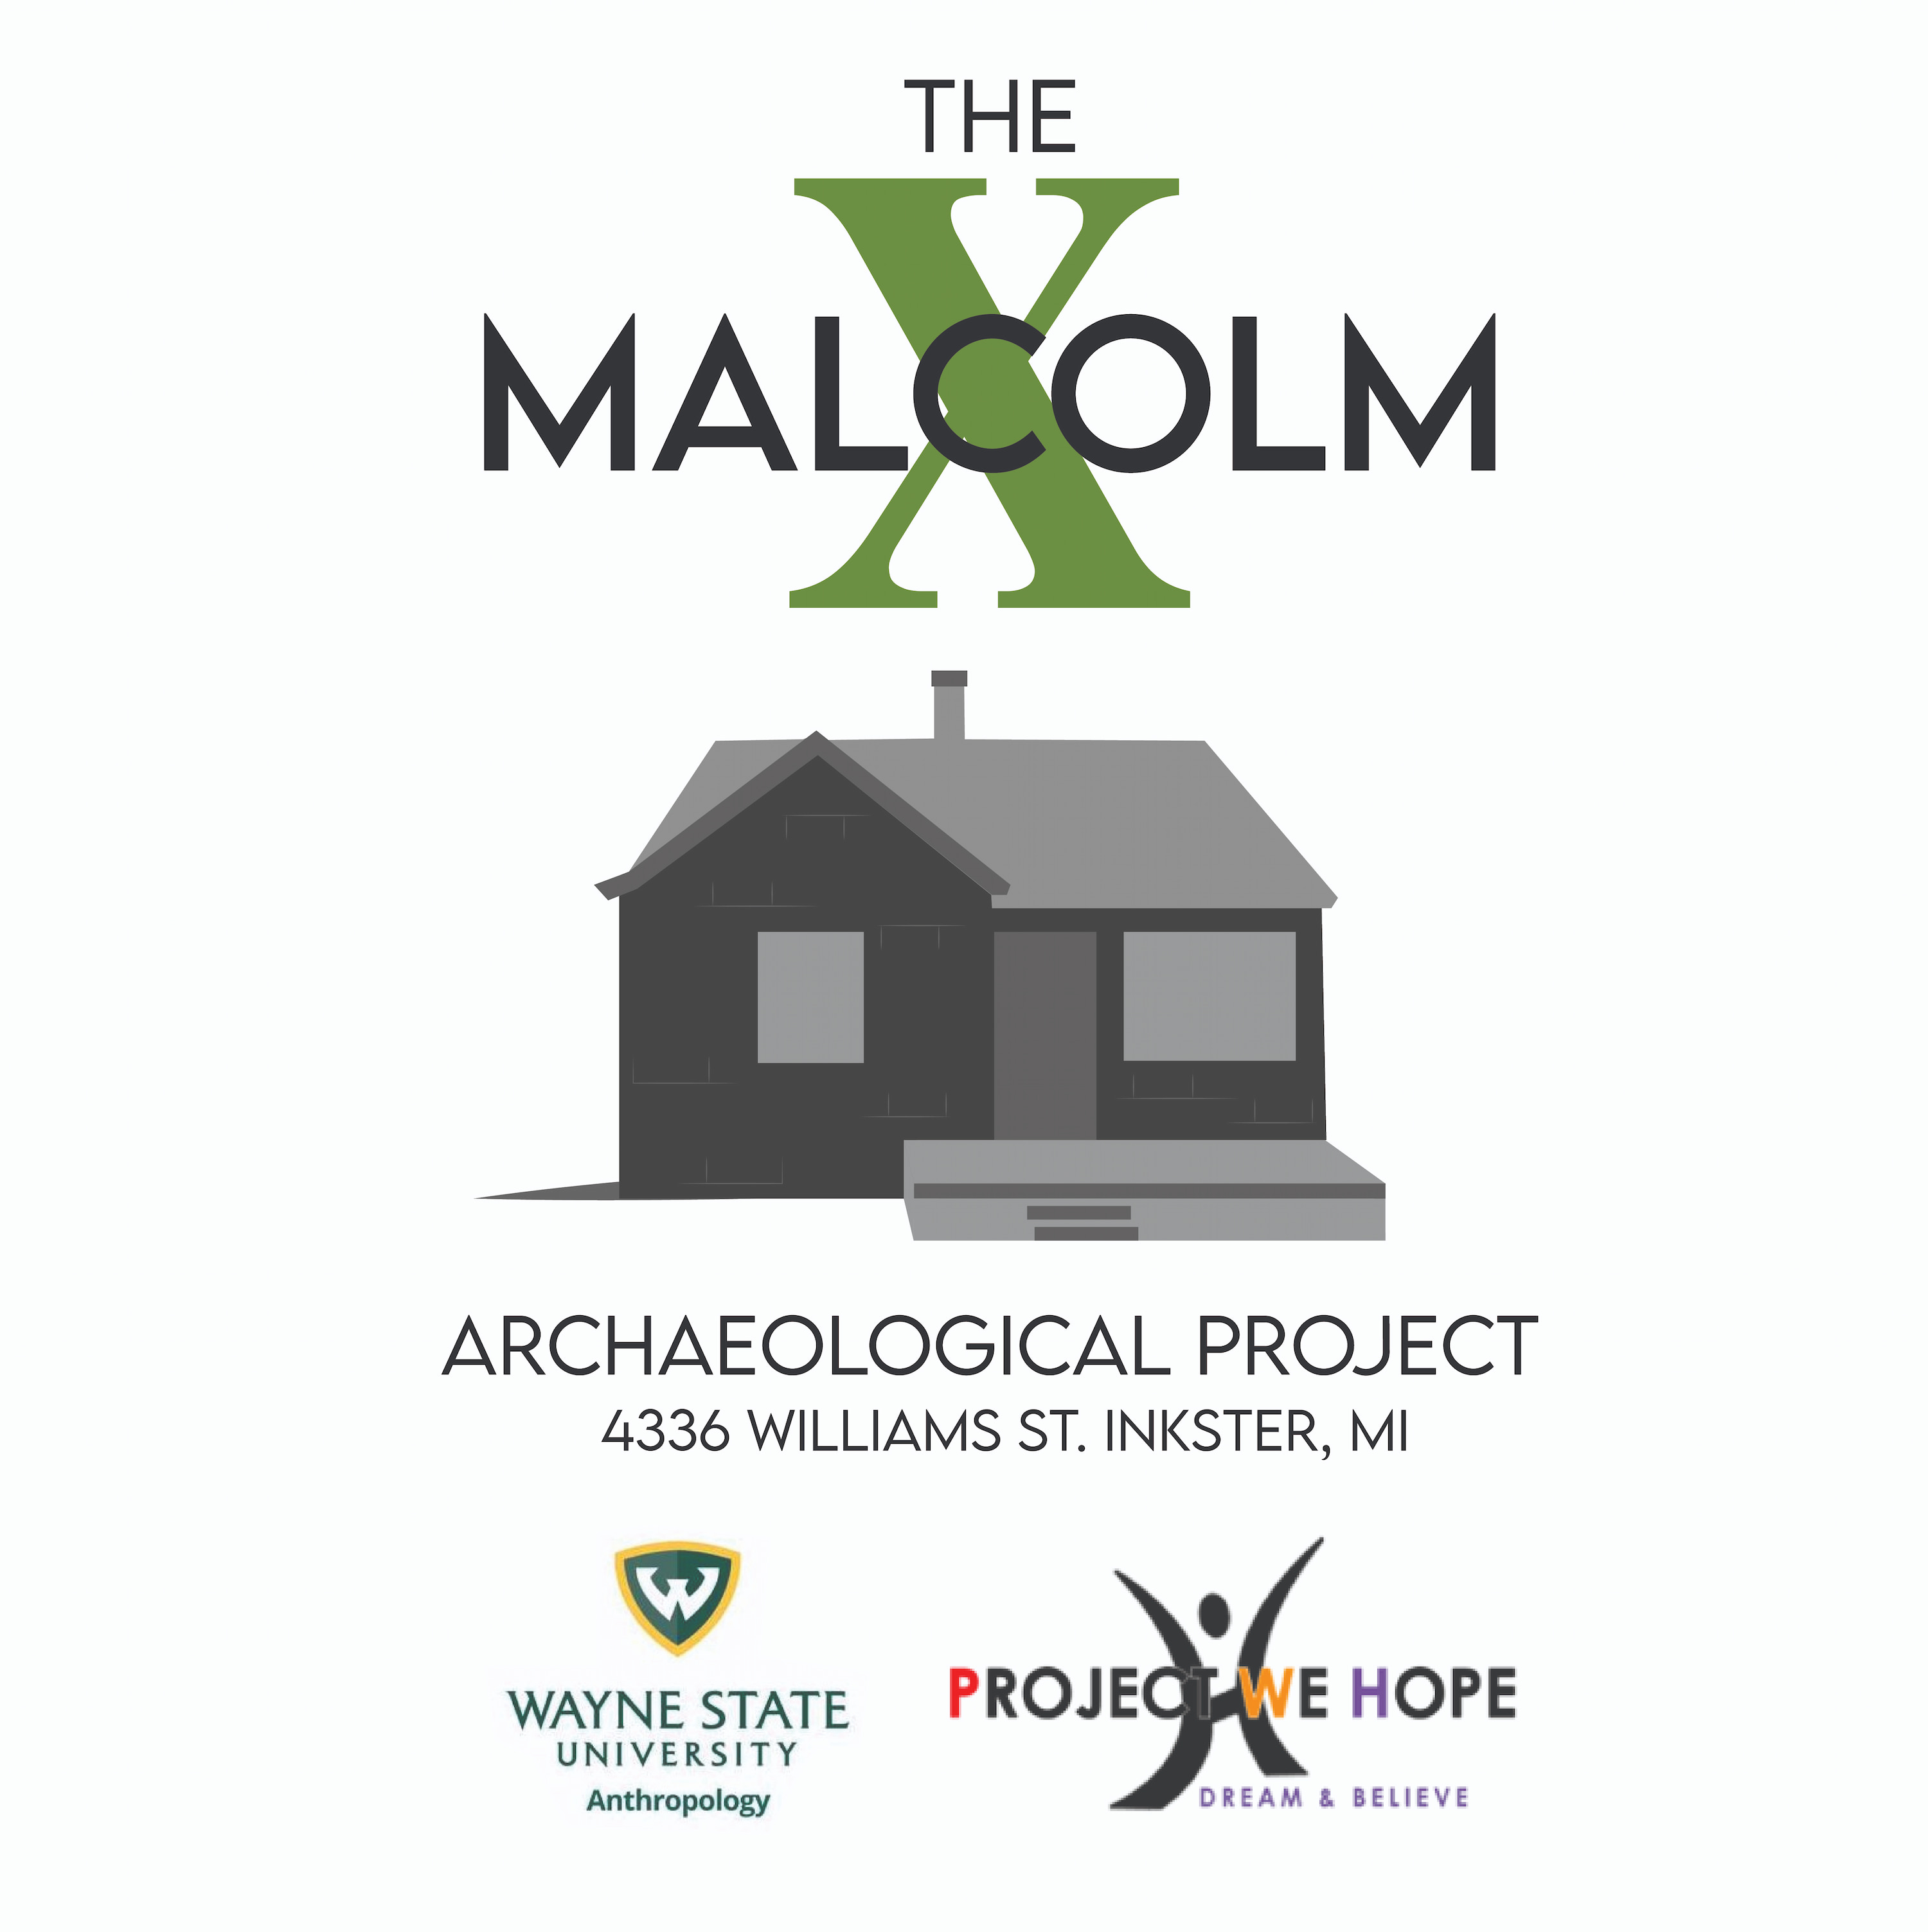 The Malcolm X Archaeological Project